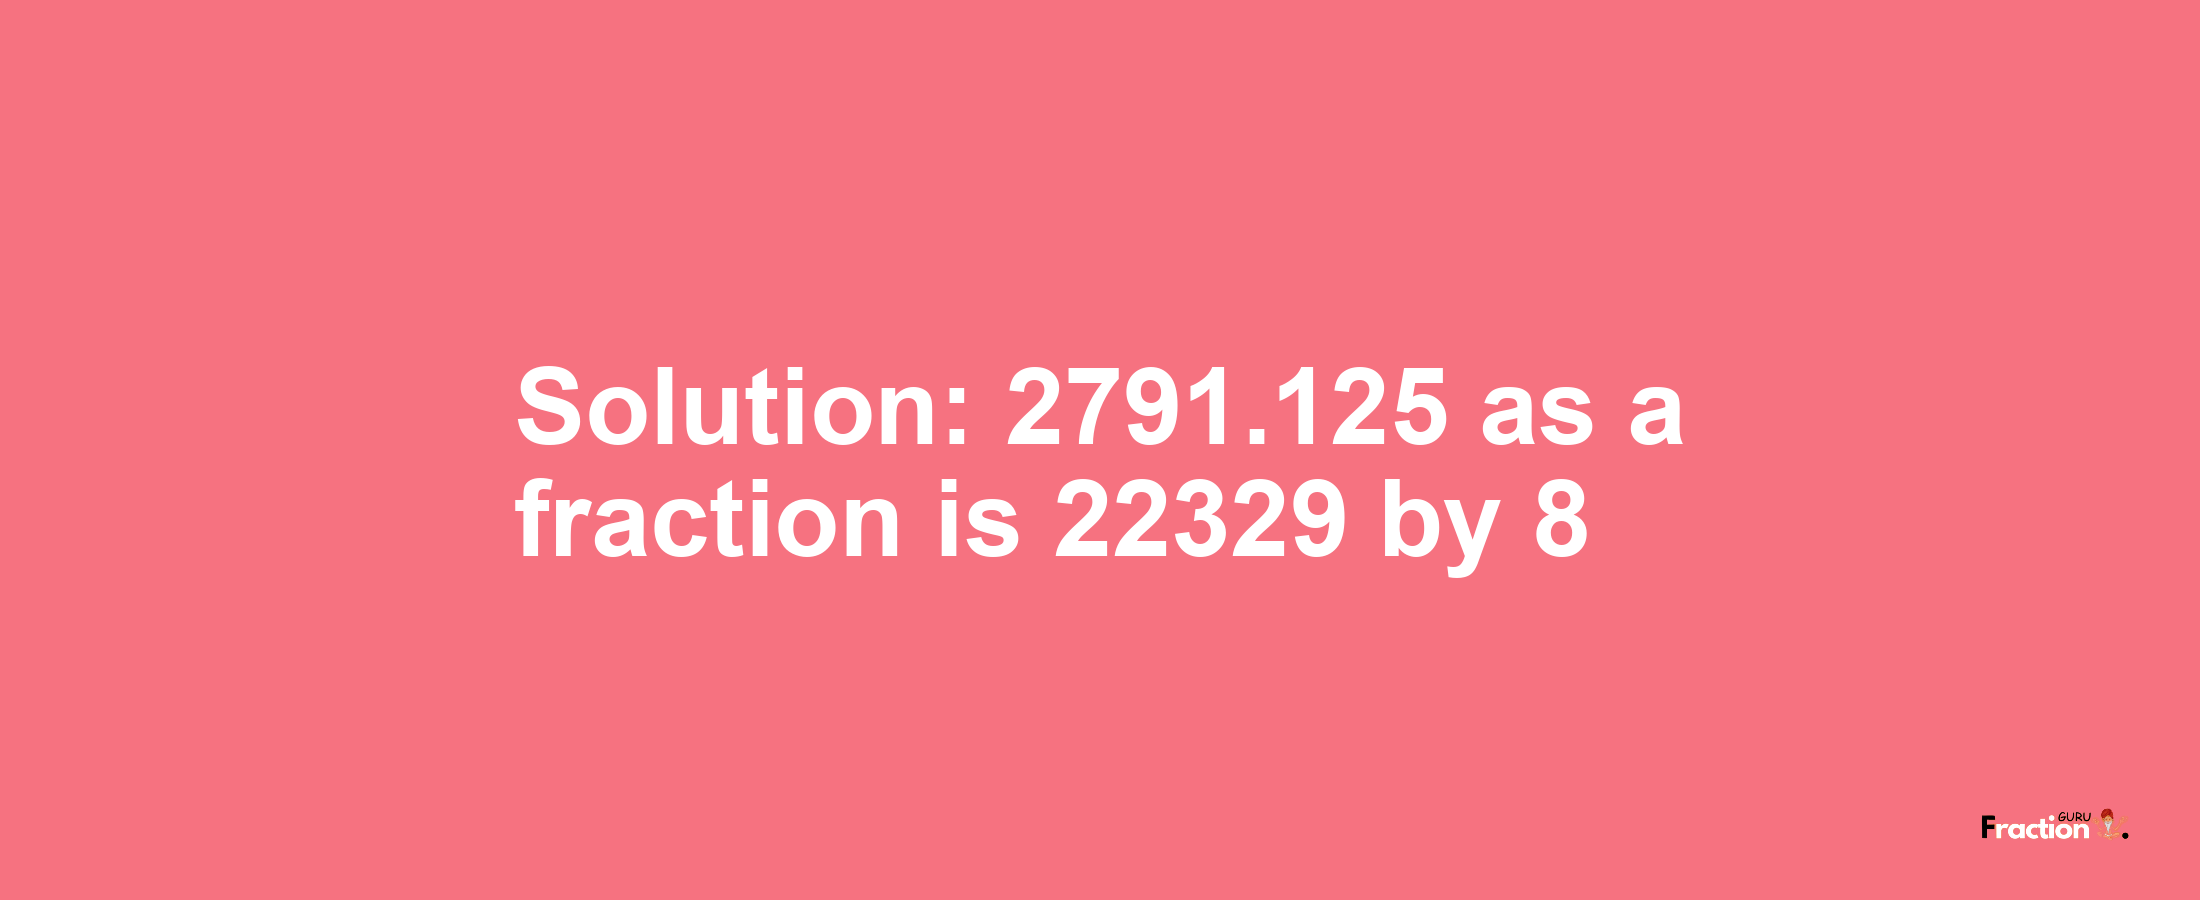 Solution:2791.125 as a fraction is 22329/8